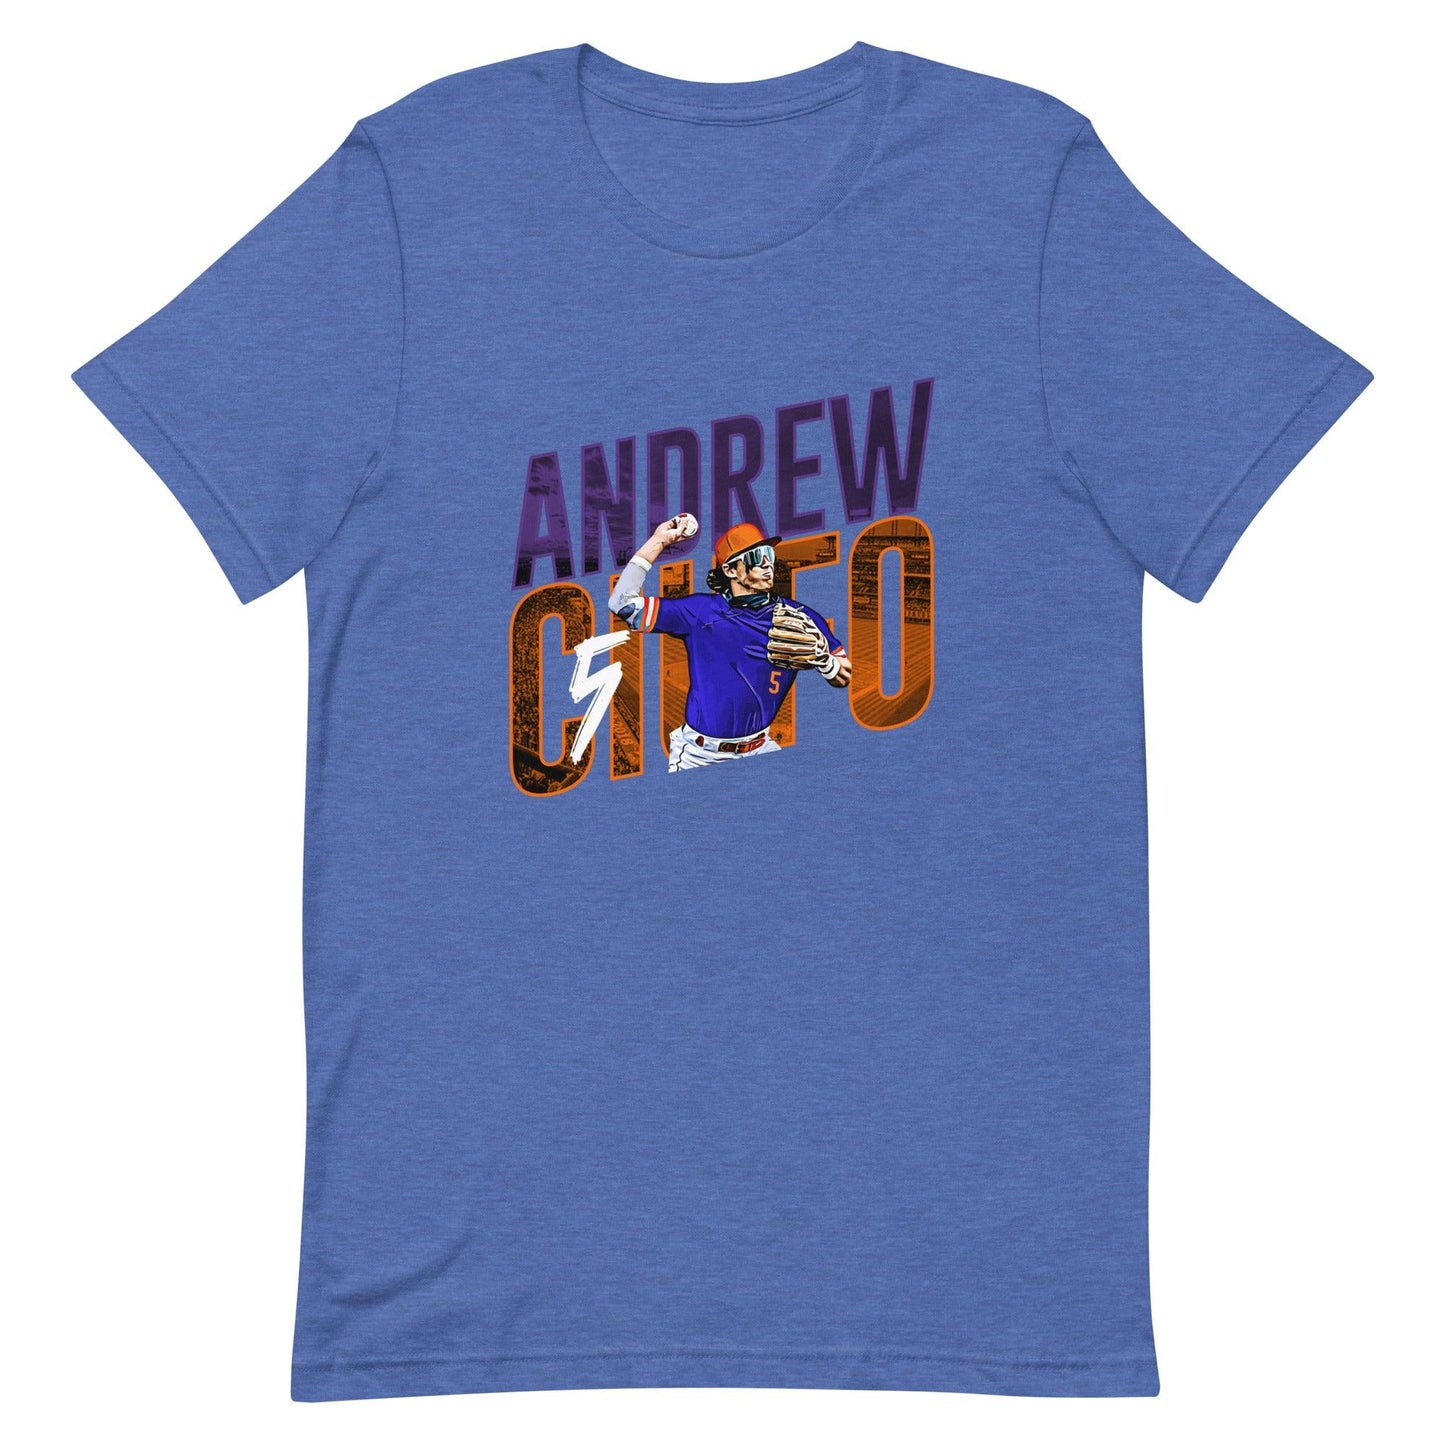 Andrew Ciufo "Gameday" t-shirt - Fan Arch